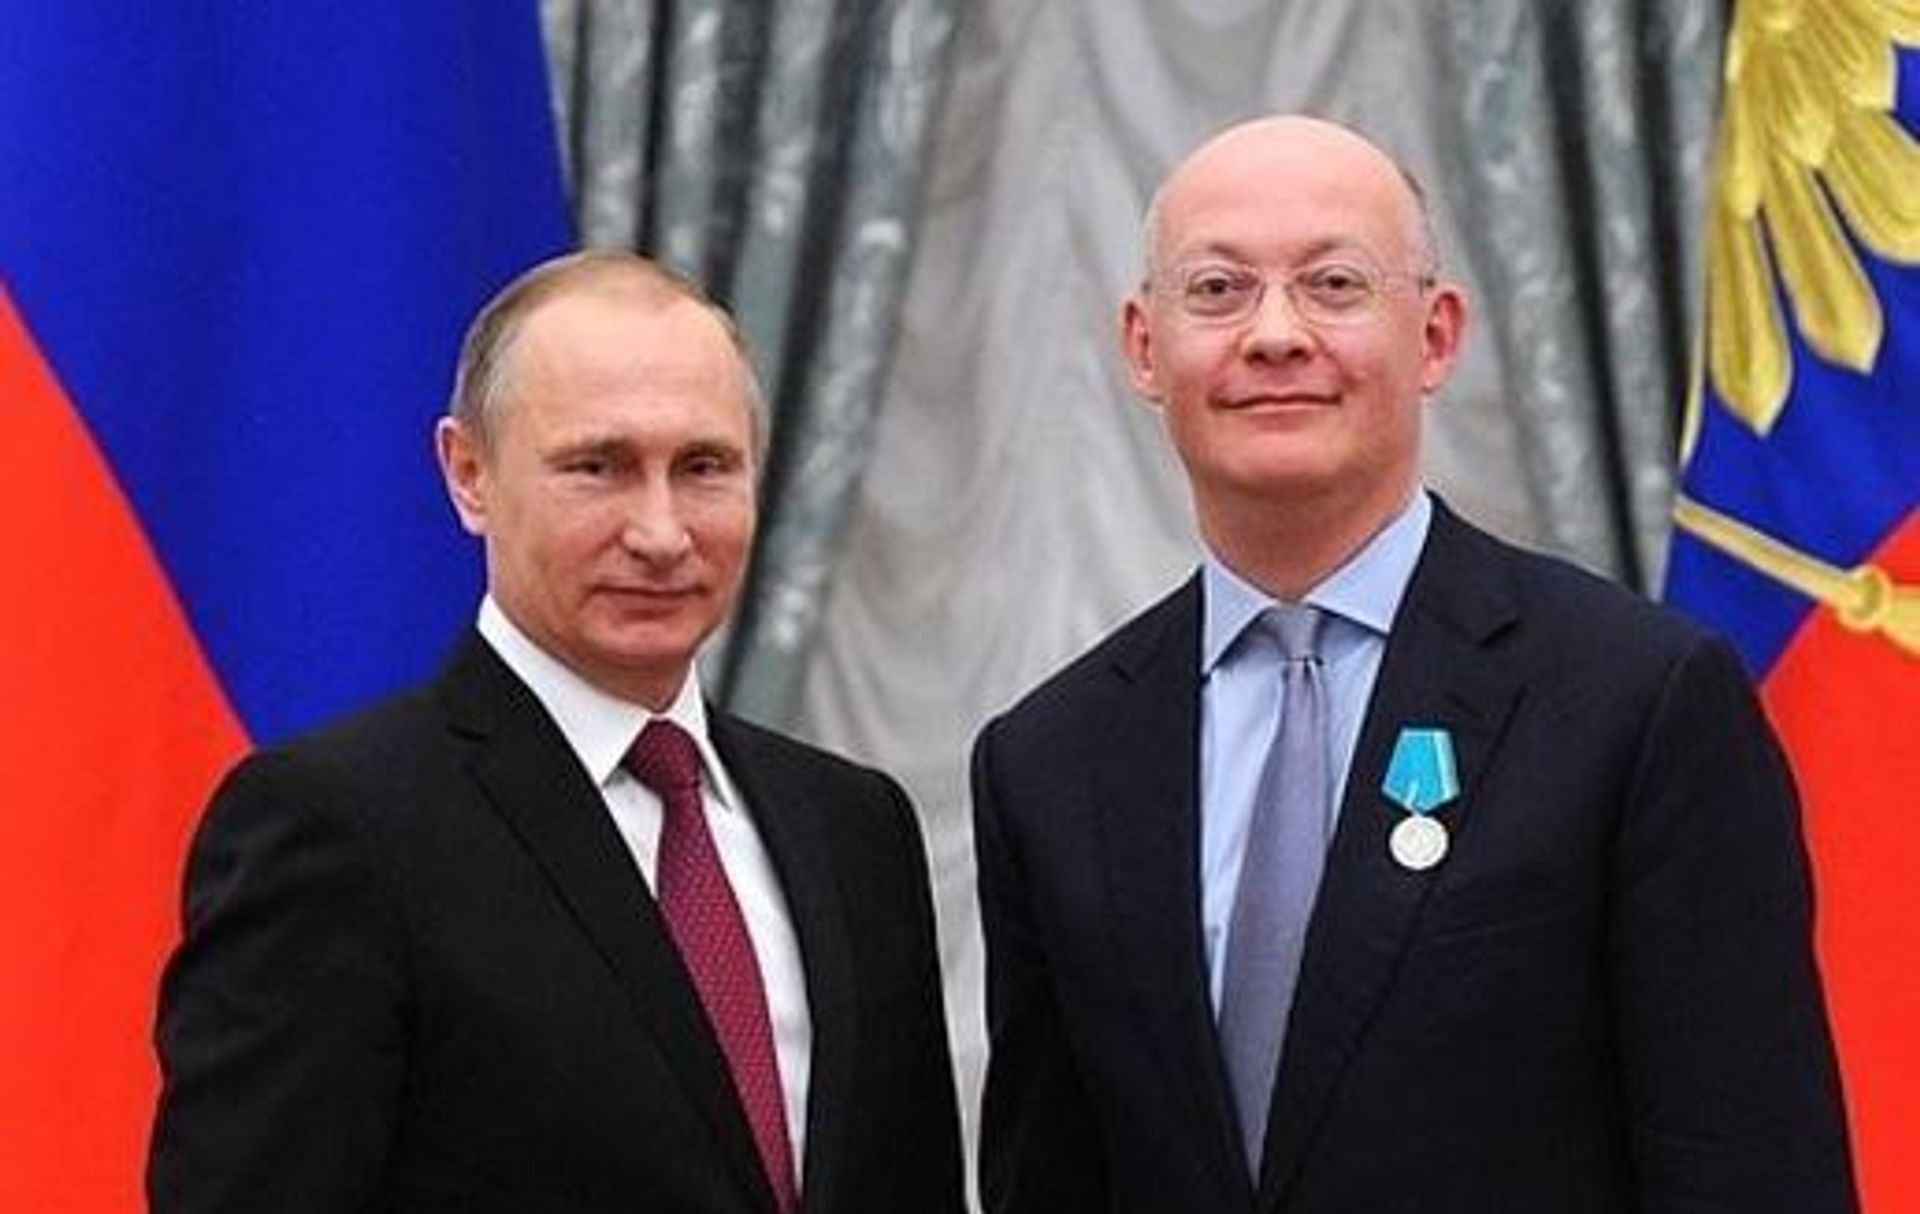 Vladamir Putin and Ian Blatchford at the Kremlin in Moscow in 2015. Courtesy of Culture Unstained